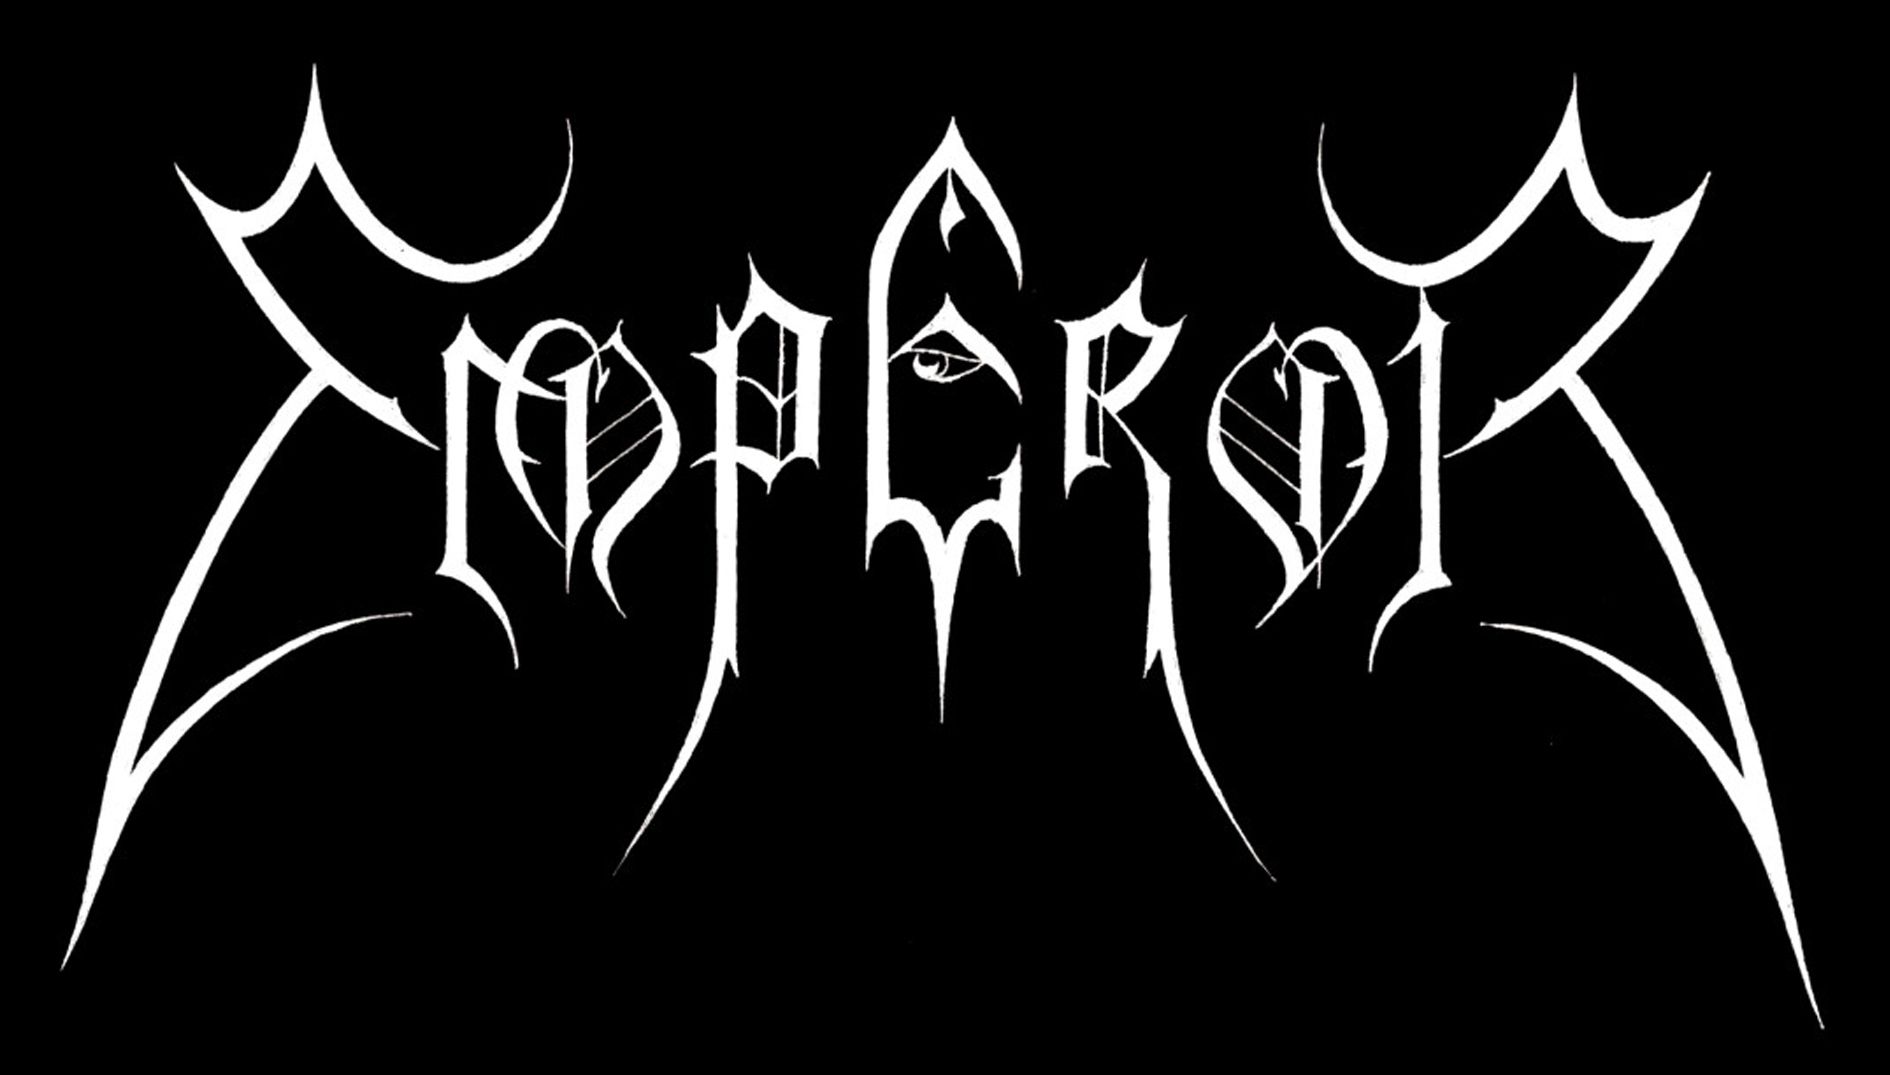 Emperor logo Black Metal canvas patch Wrath Of The Tyrant In The Nightside Eclipse. Metal music bands, Metal band logos, Black metal art